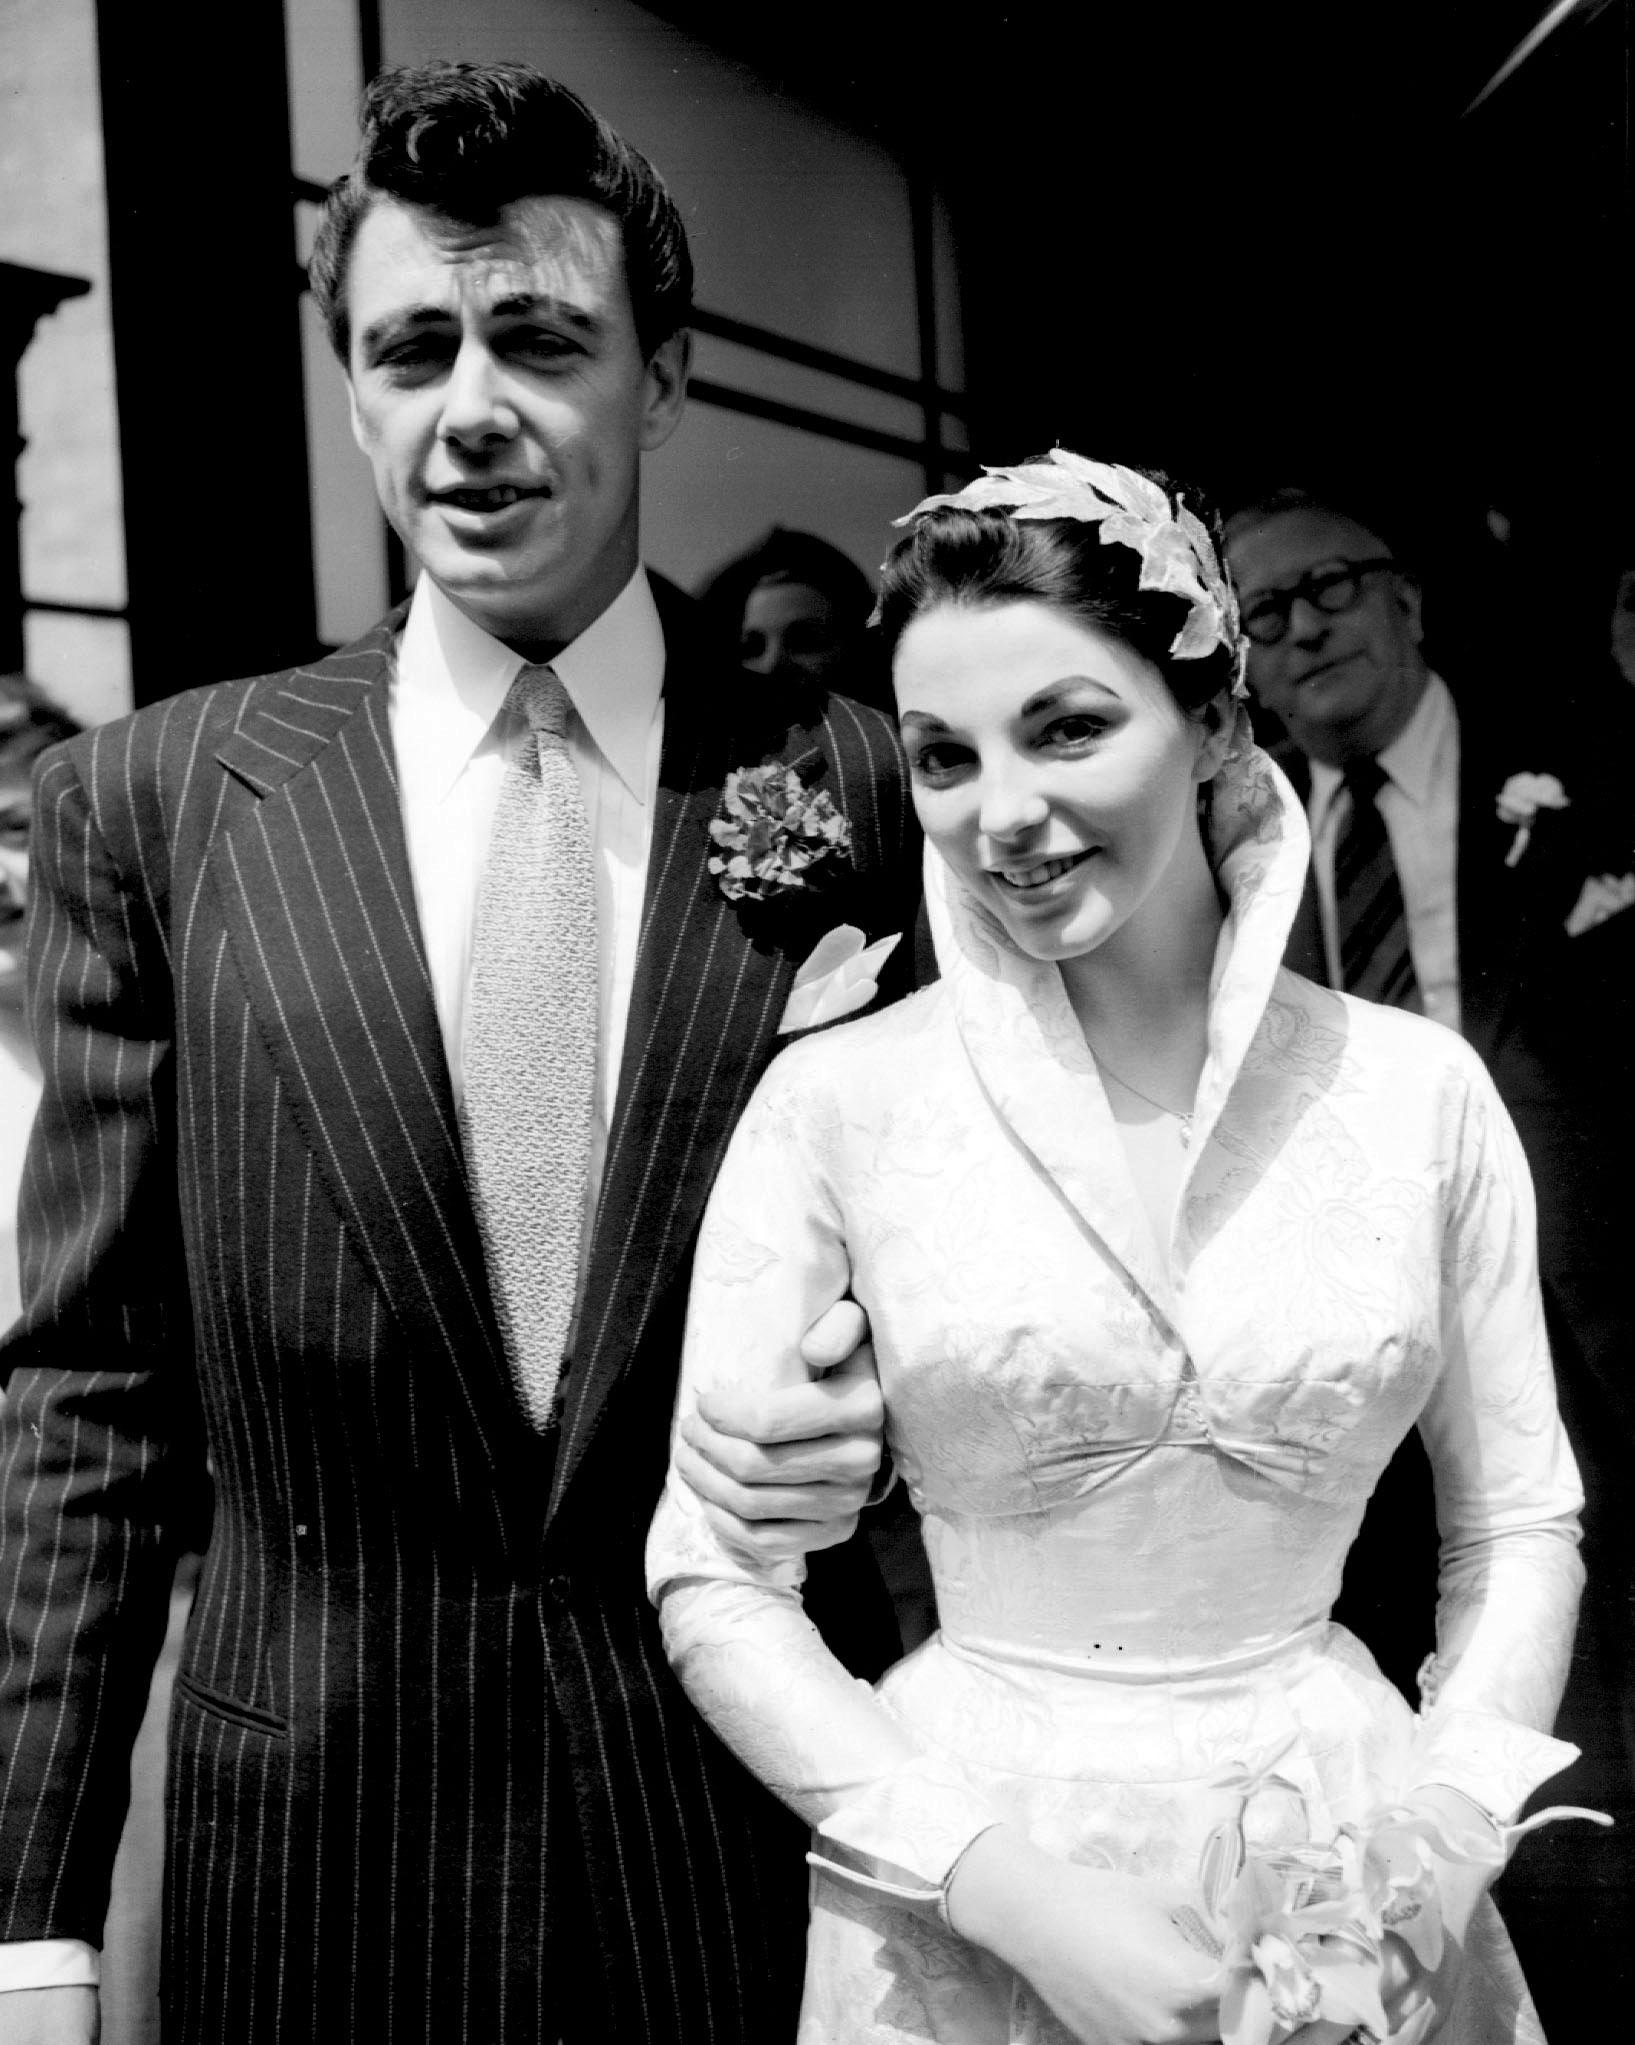 Actor Maxwell Reed and his bride Joan Collins after their wedding at Caxton Hall Register Office in 1952, in London. | Source: Getty Images